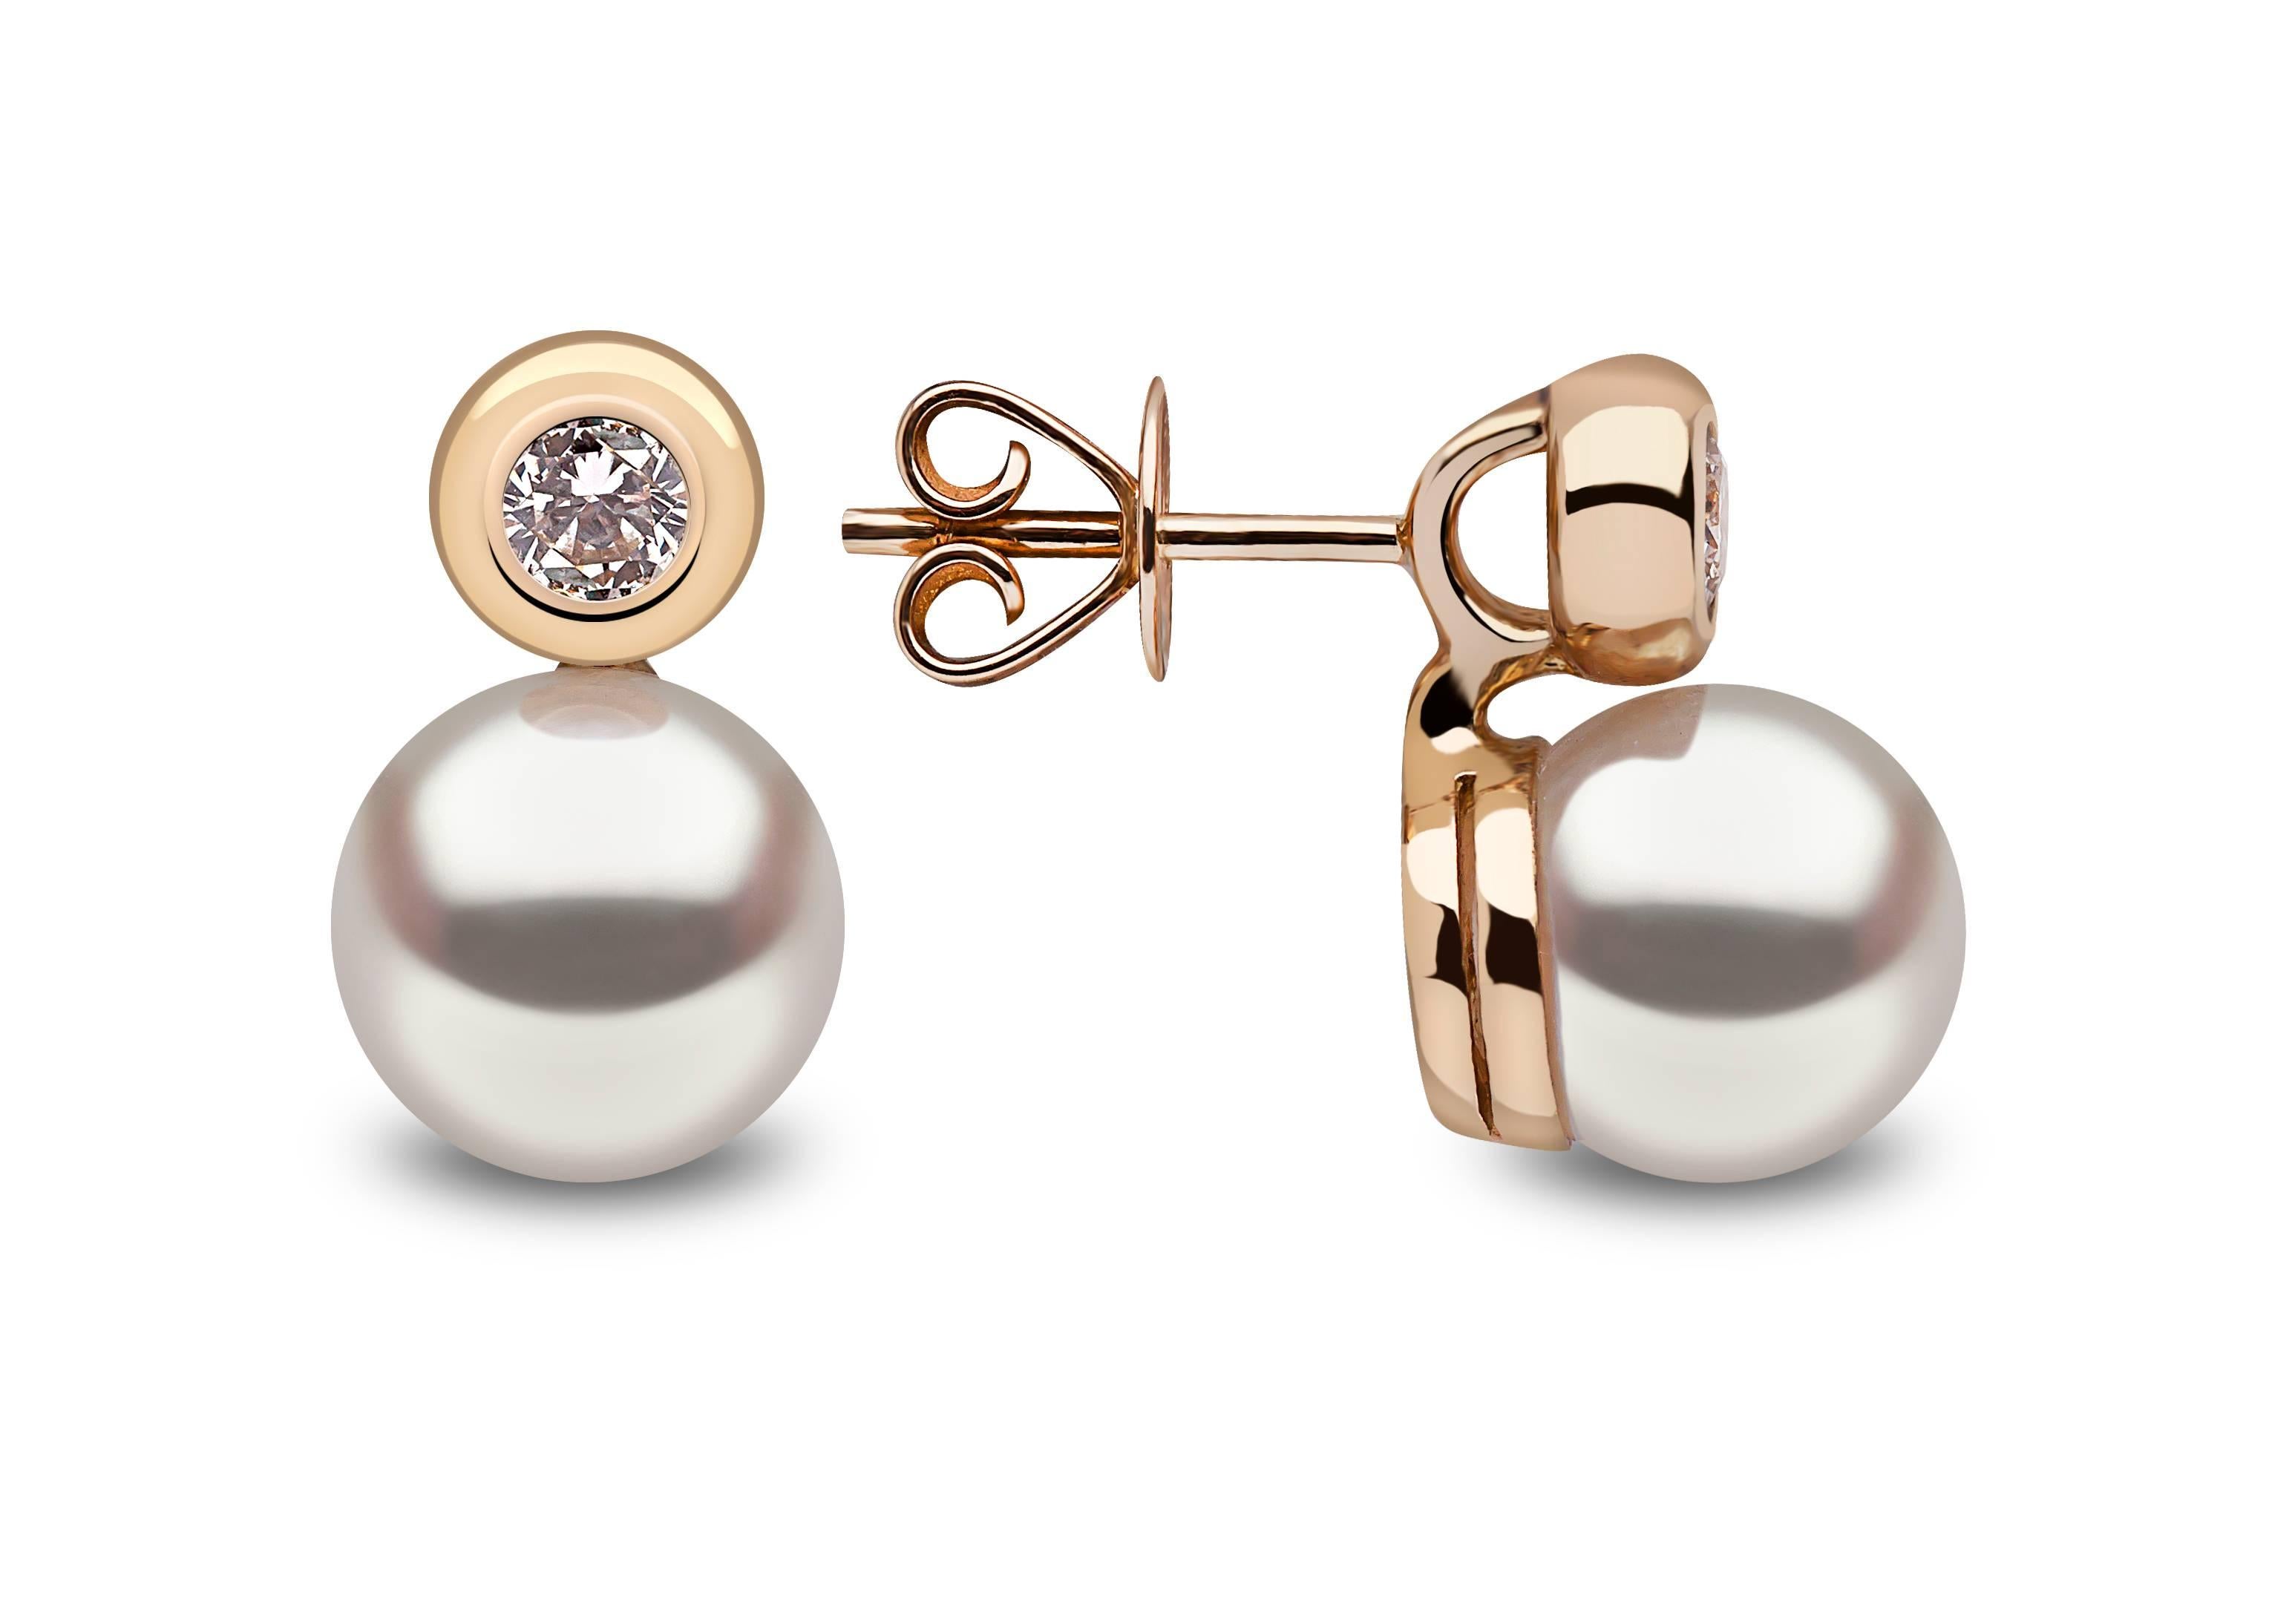 The classic combination of white diamonds and 18k yellow gold is re-imagined with two bold Cultured pearls in these exquisite earrings from Yoko London. 

- 18k Yelllow Gold
- 2 Diamonds 0.30cts
- 9mm Cultured Pearl
